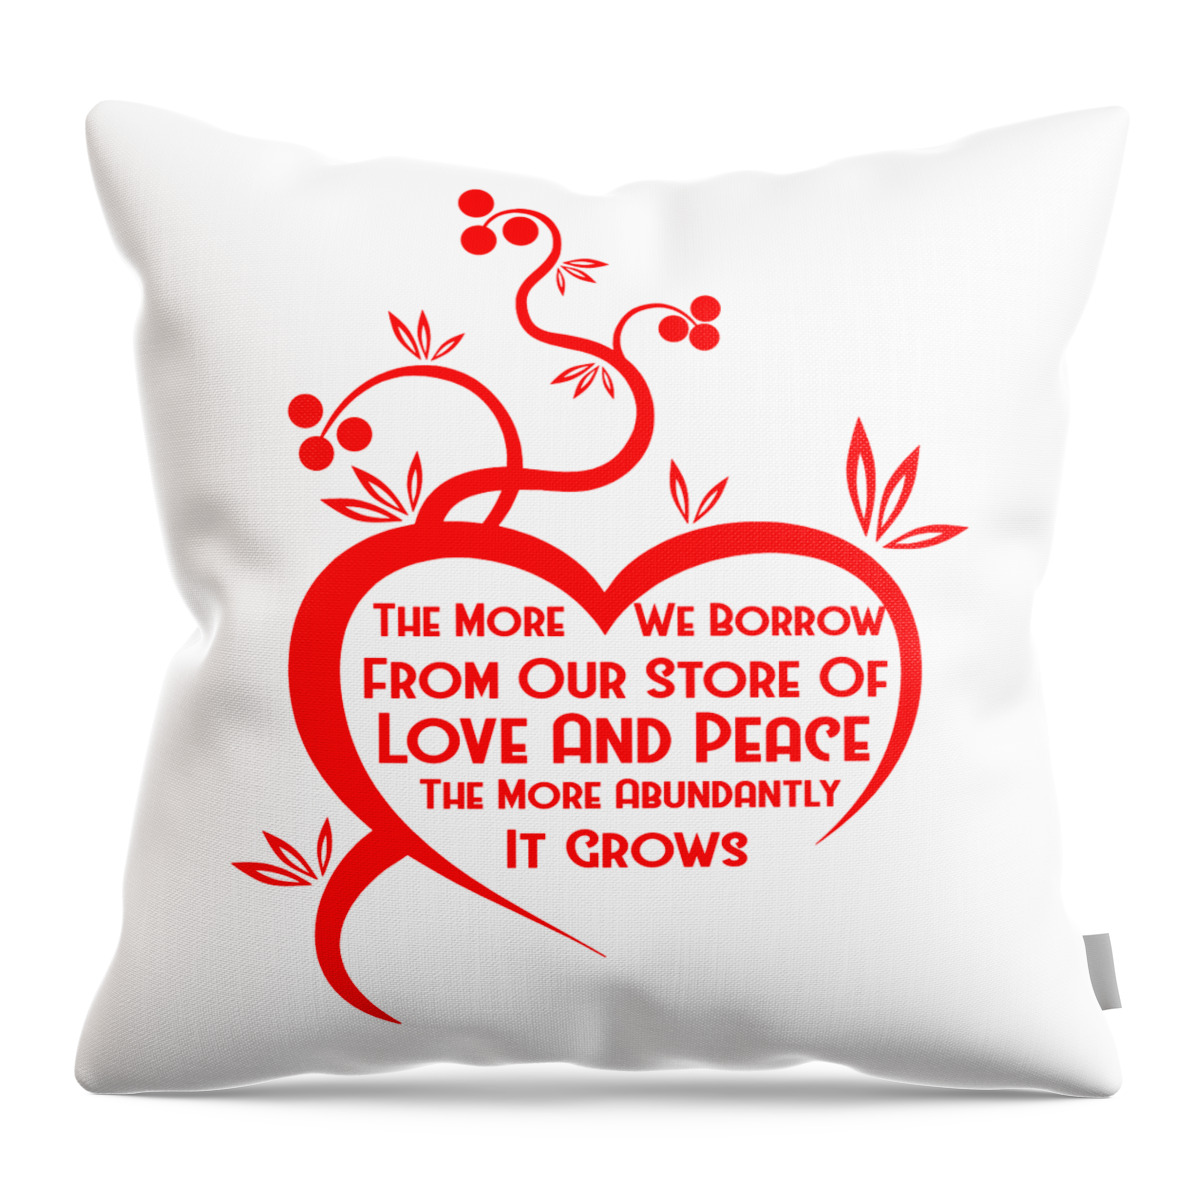 The More We Borrow From Our Store Of Love And Peace The More Abundantly It Grows Throw Pillow featuring the digital art The More We Borrow by Az Jackson